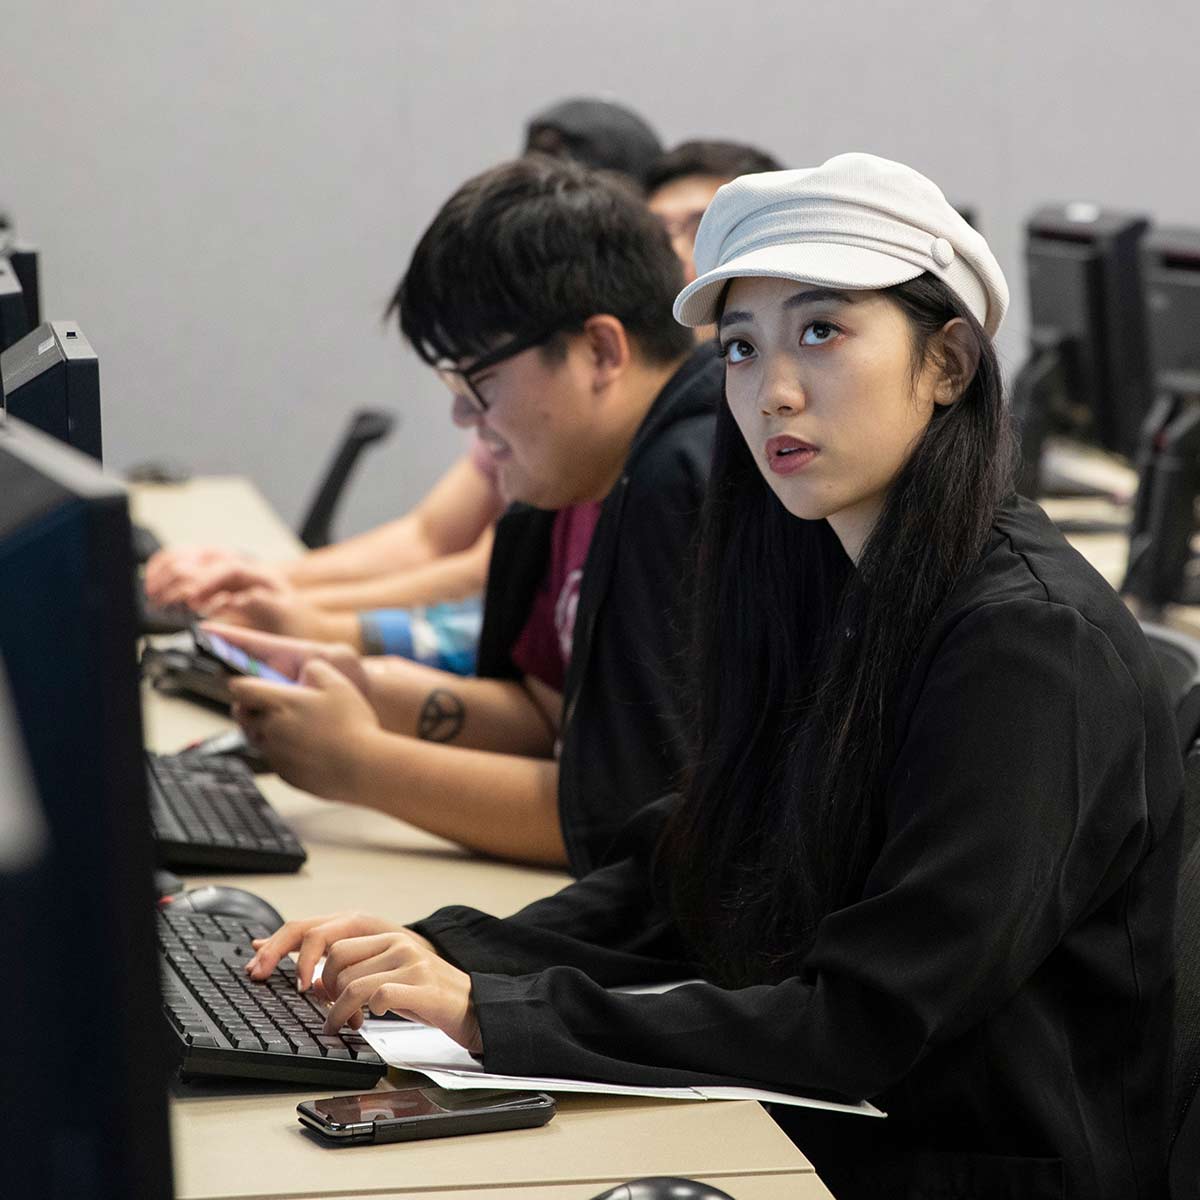 A student in a data analysis class looking focused while at her computer station.